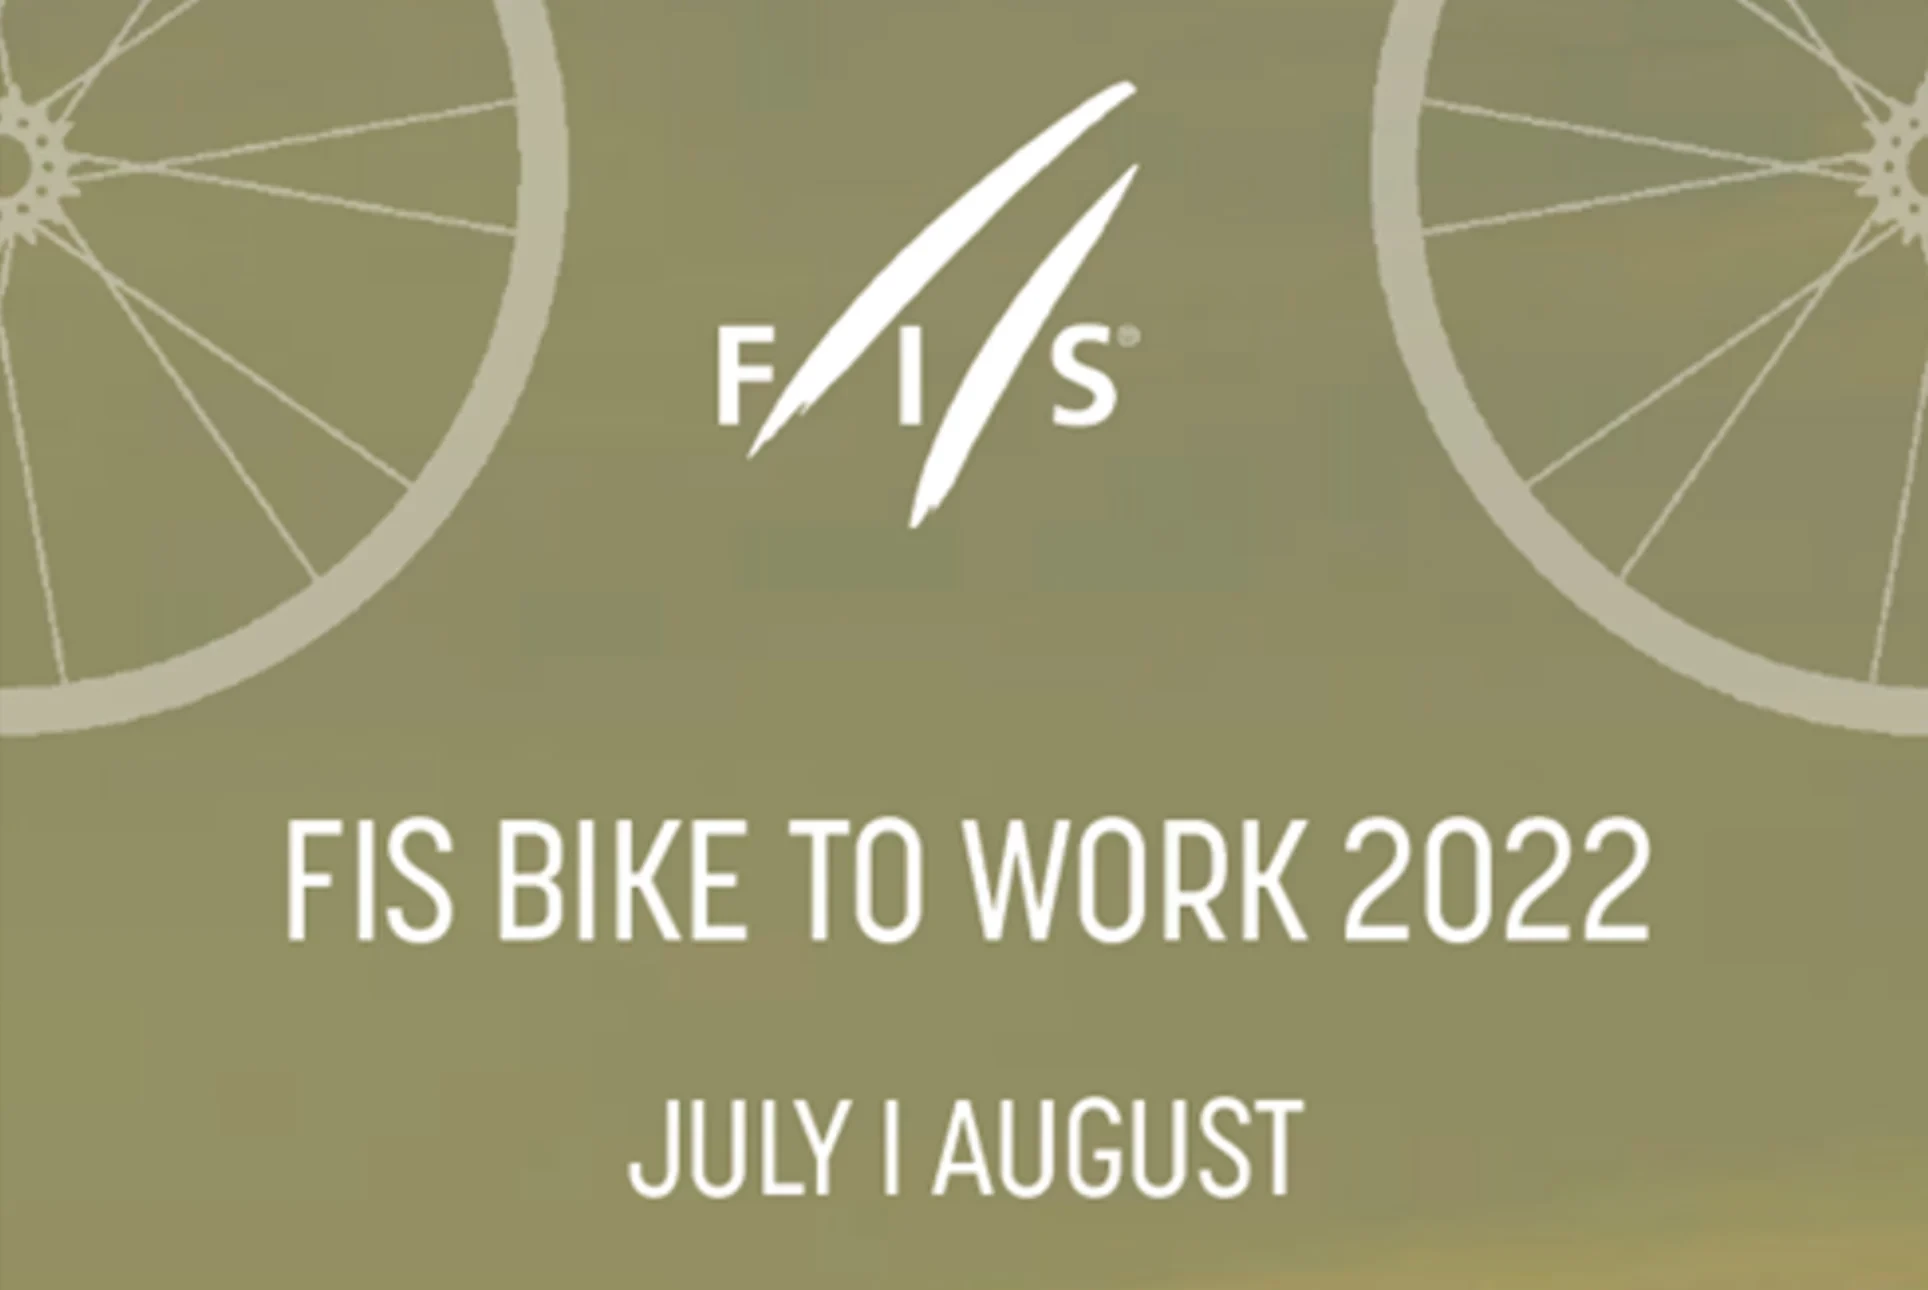 FIS brings back Bike to Work Challenge to promote healthy lifestyle